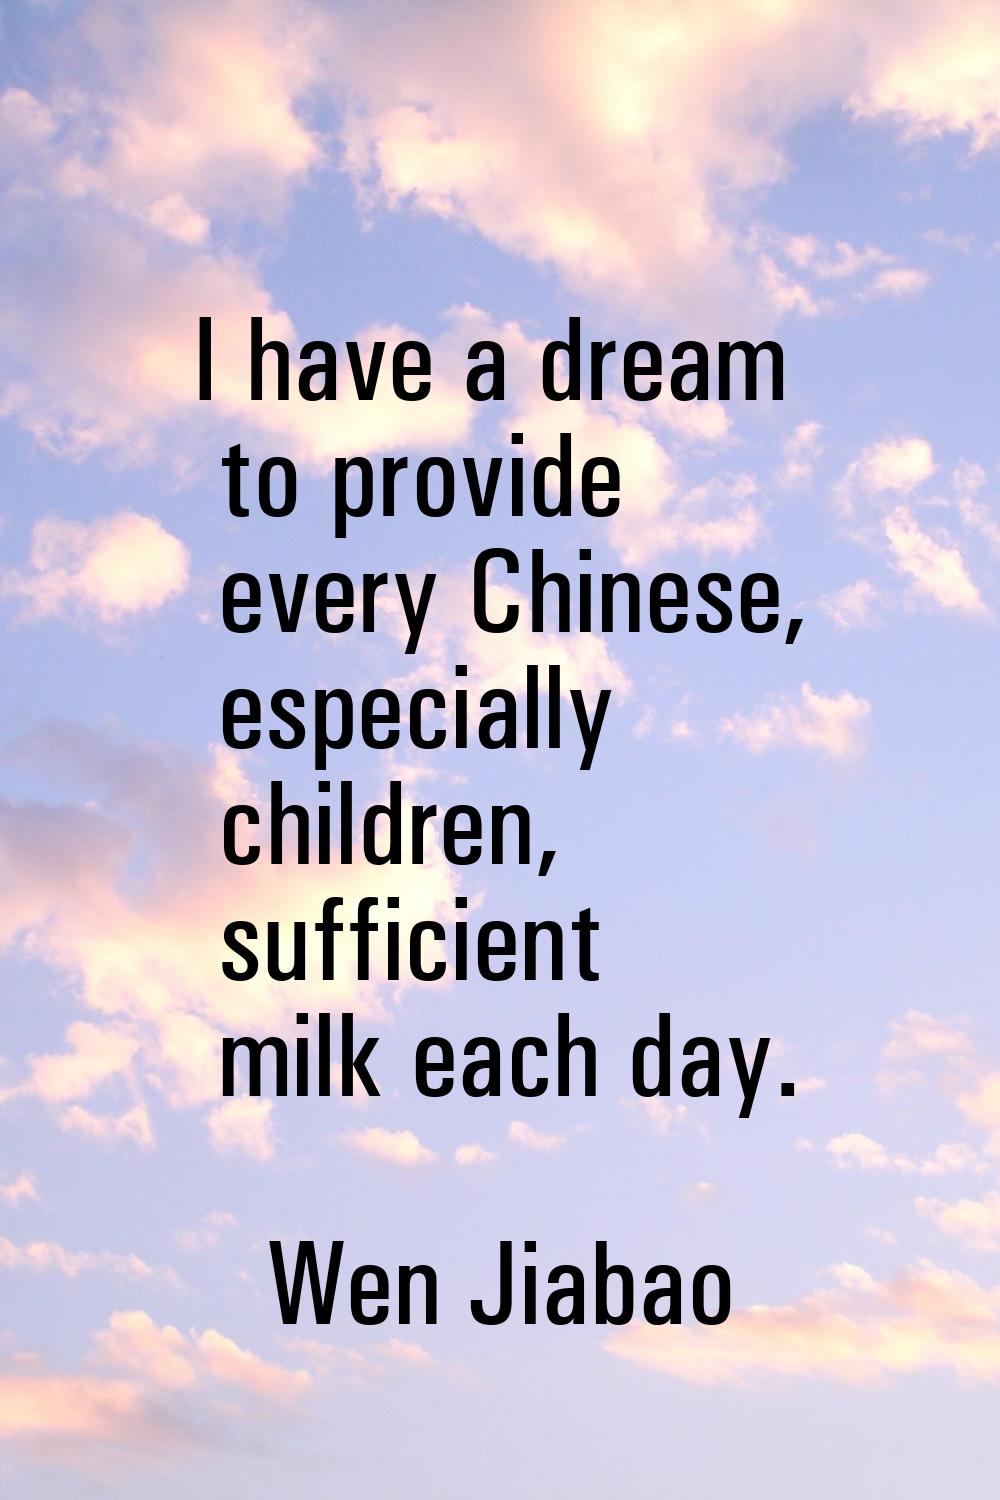 I have a dream to provide every Chinese, especially children, sufficient milk each day.